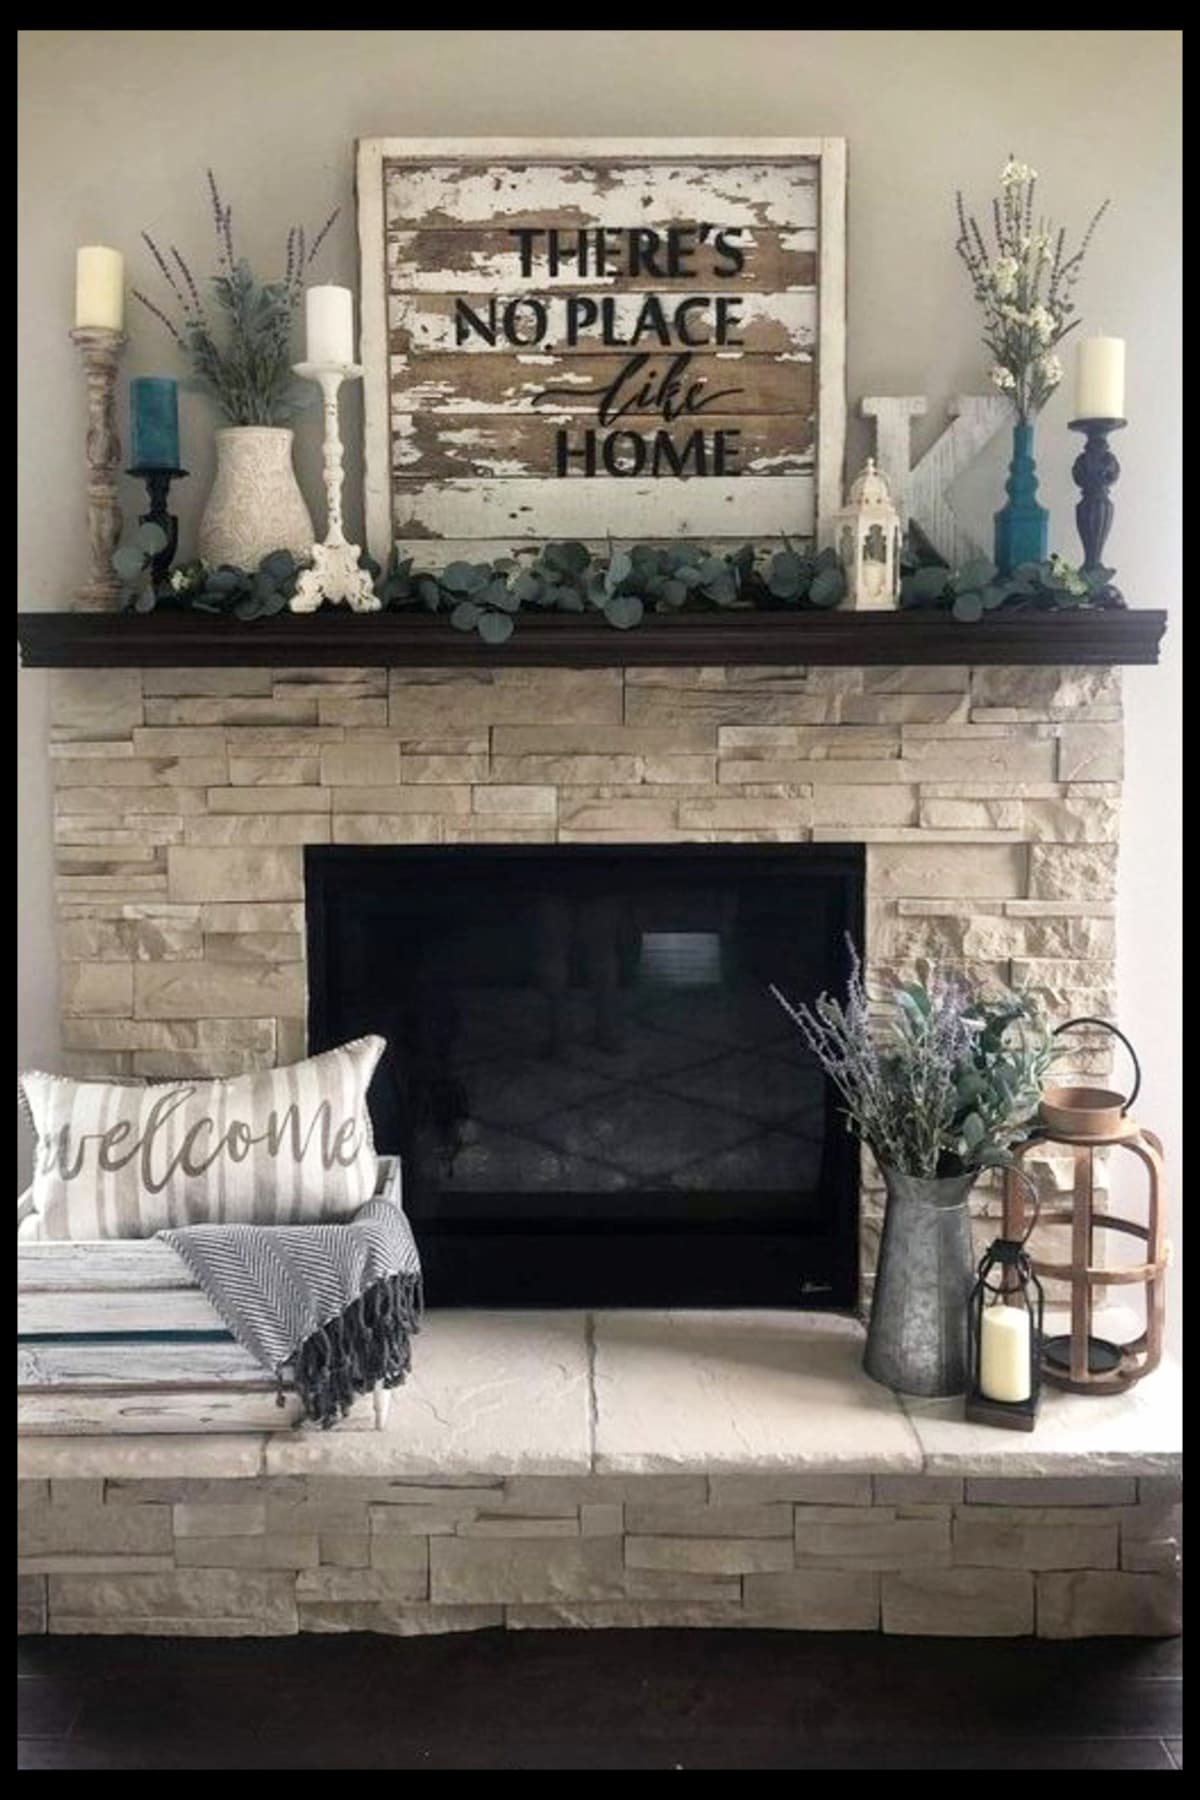 farmhouse fireplace ideas rustic decorations on mantle, barn wood framed picture on wall, pillows, blankets, candles galvanized vase with greenery and more modern country farmhouse decor items